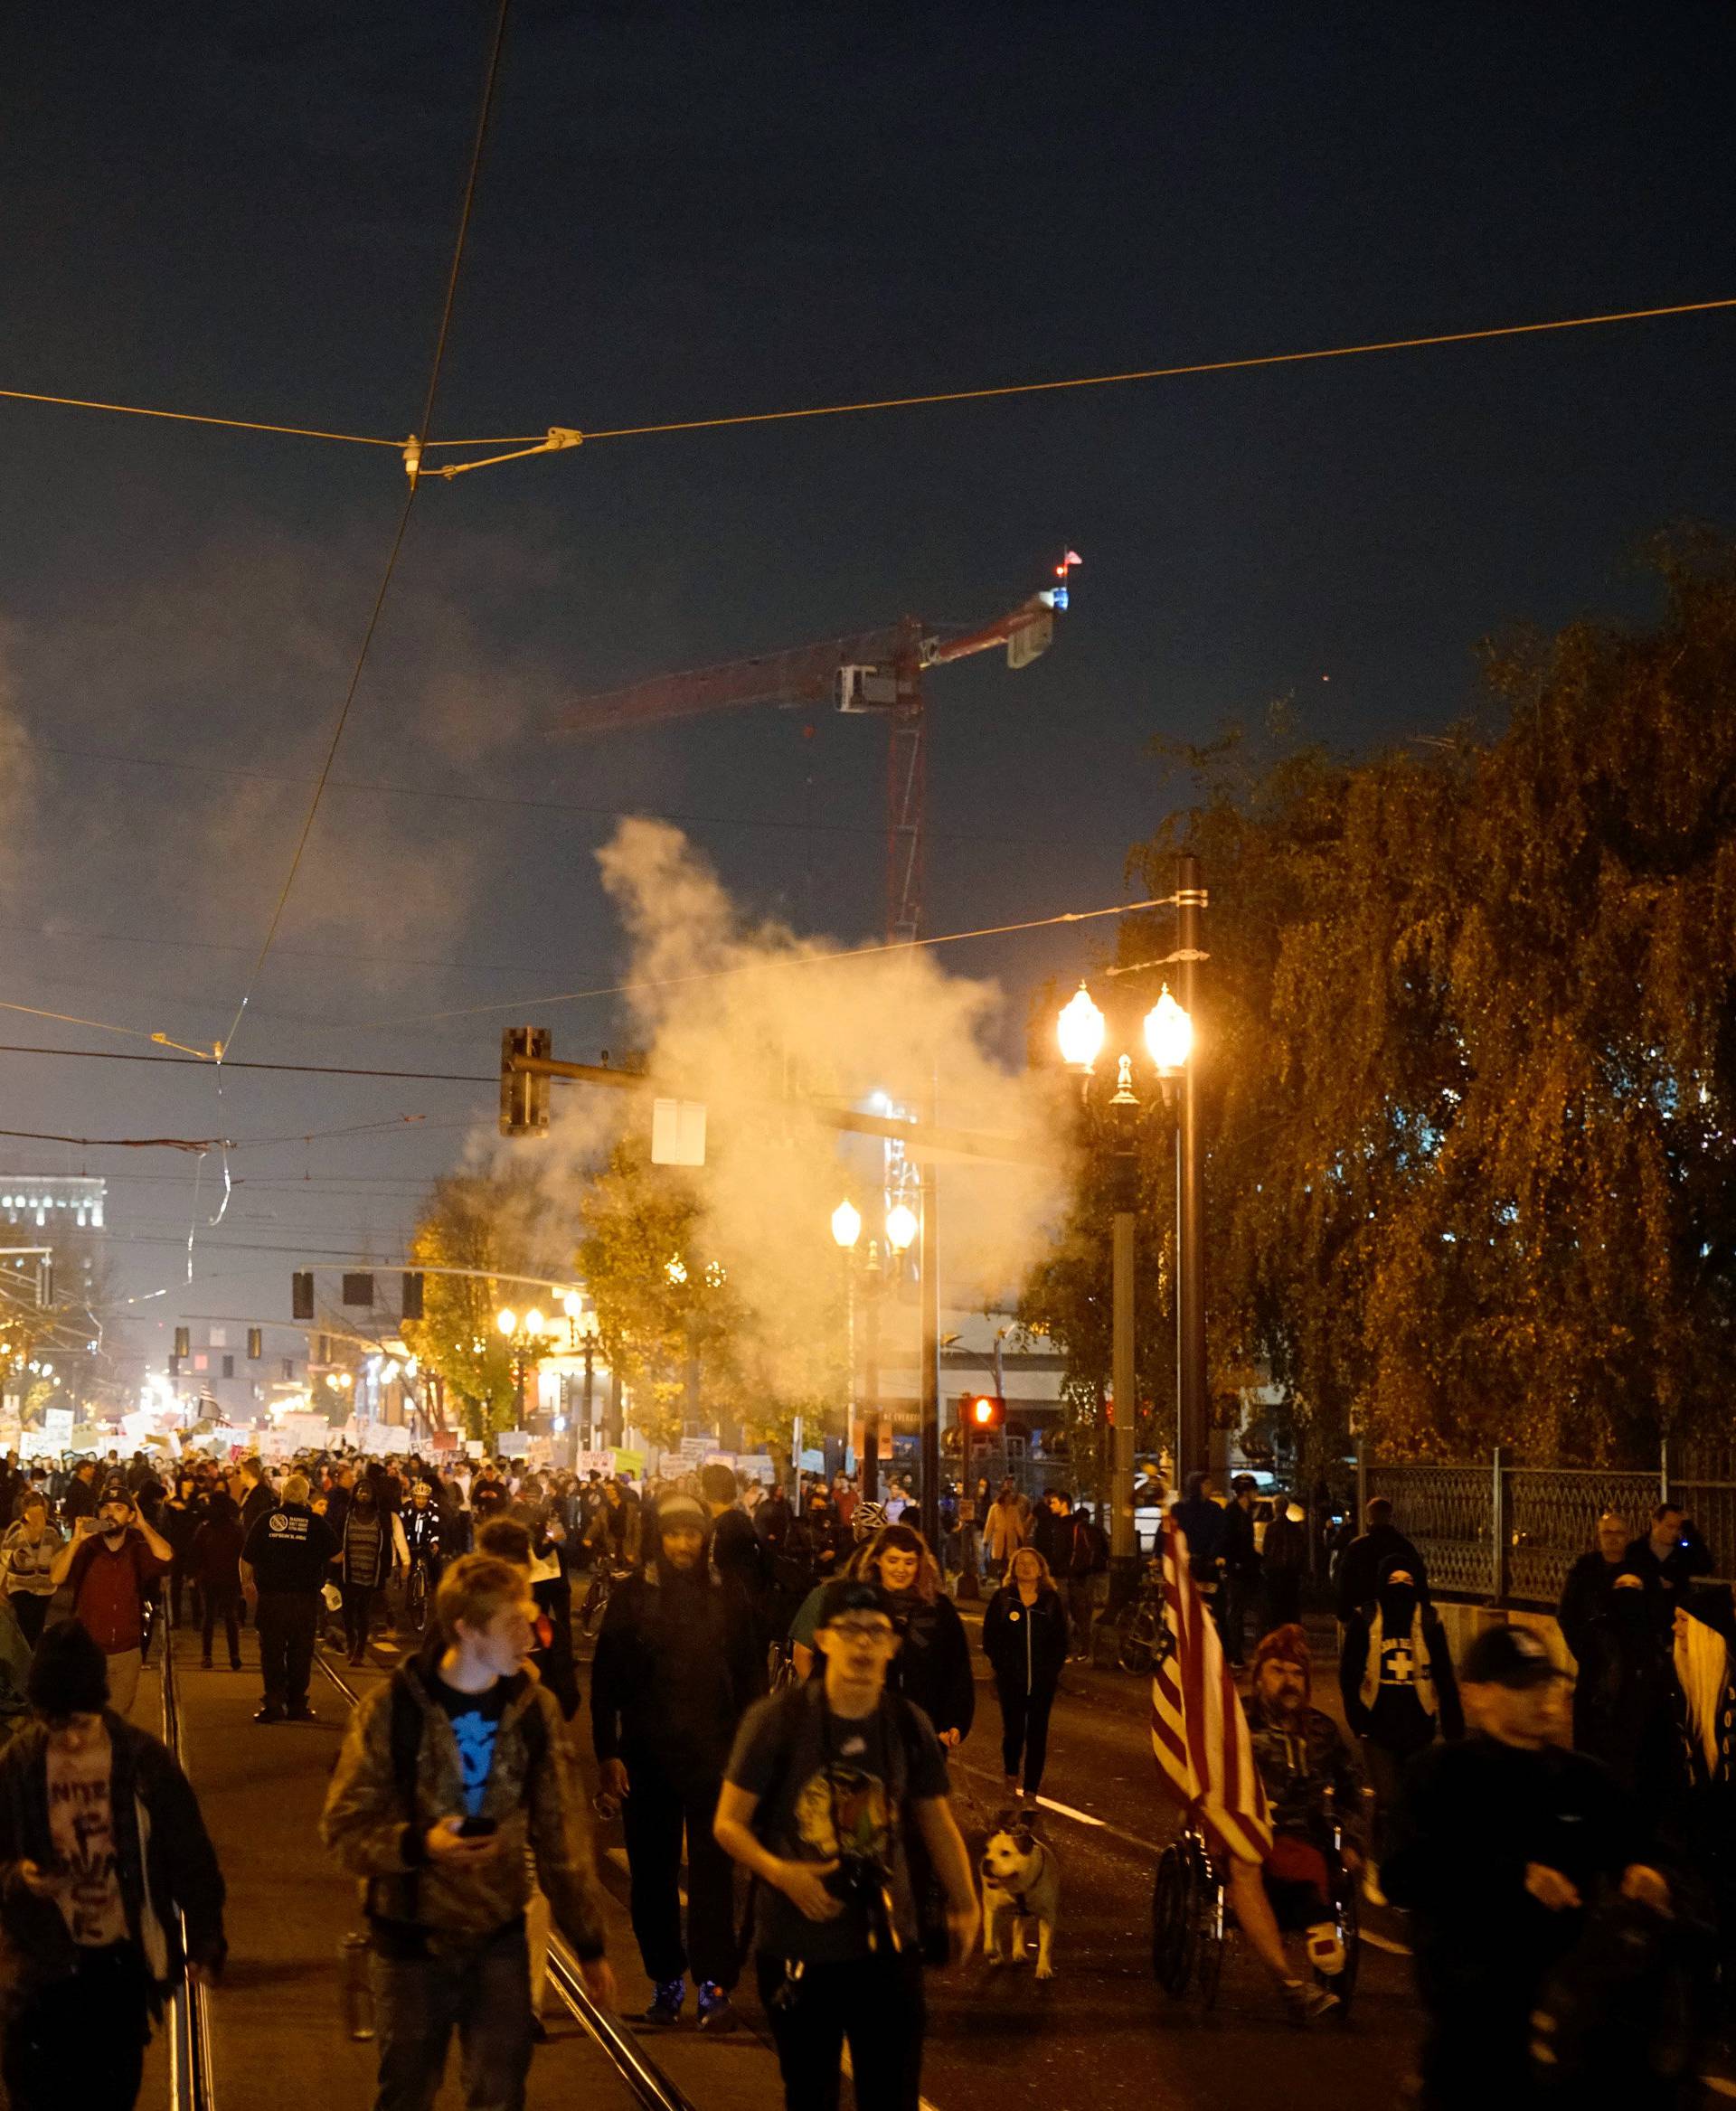 Smoke rises during a protest against the election of Republican Donald Trump as President of the United States in Portland, Oregon